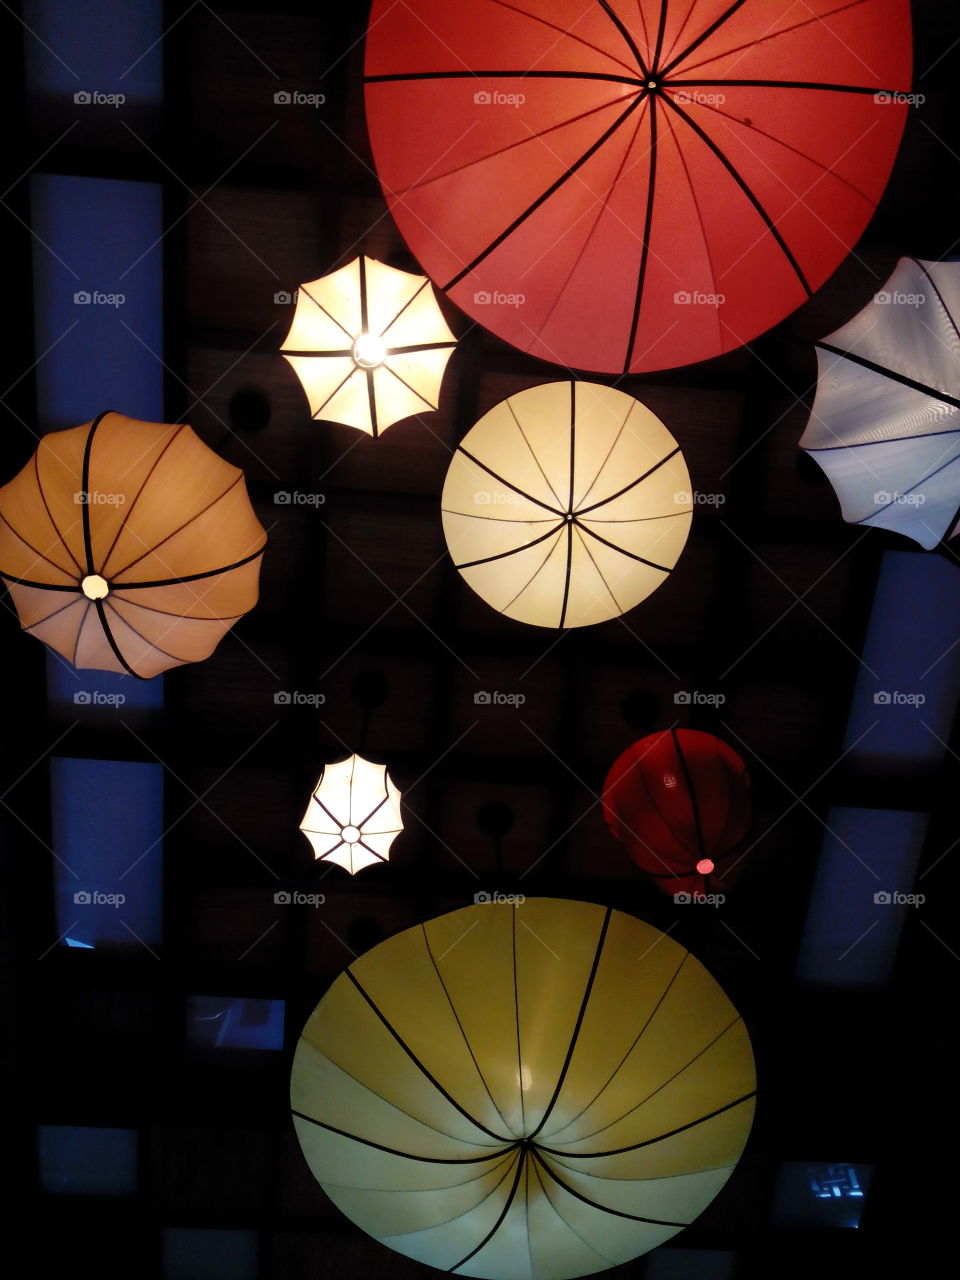 Colorful lantern design. Typical from Southeast Asia